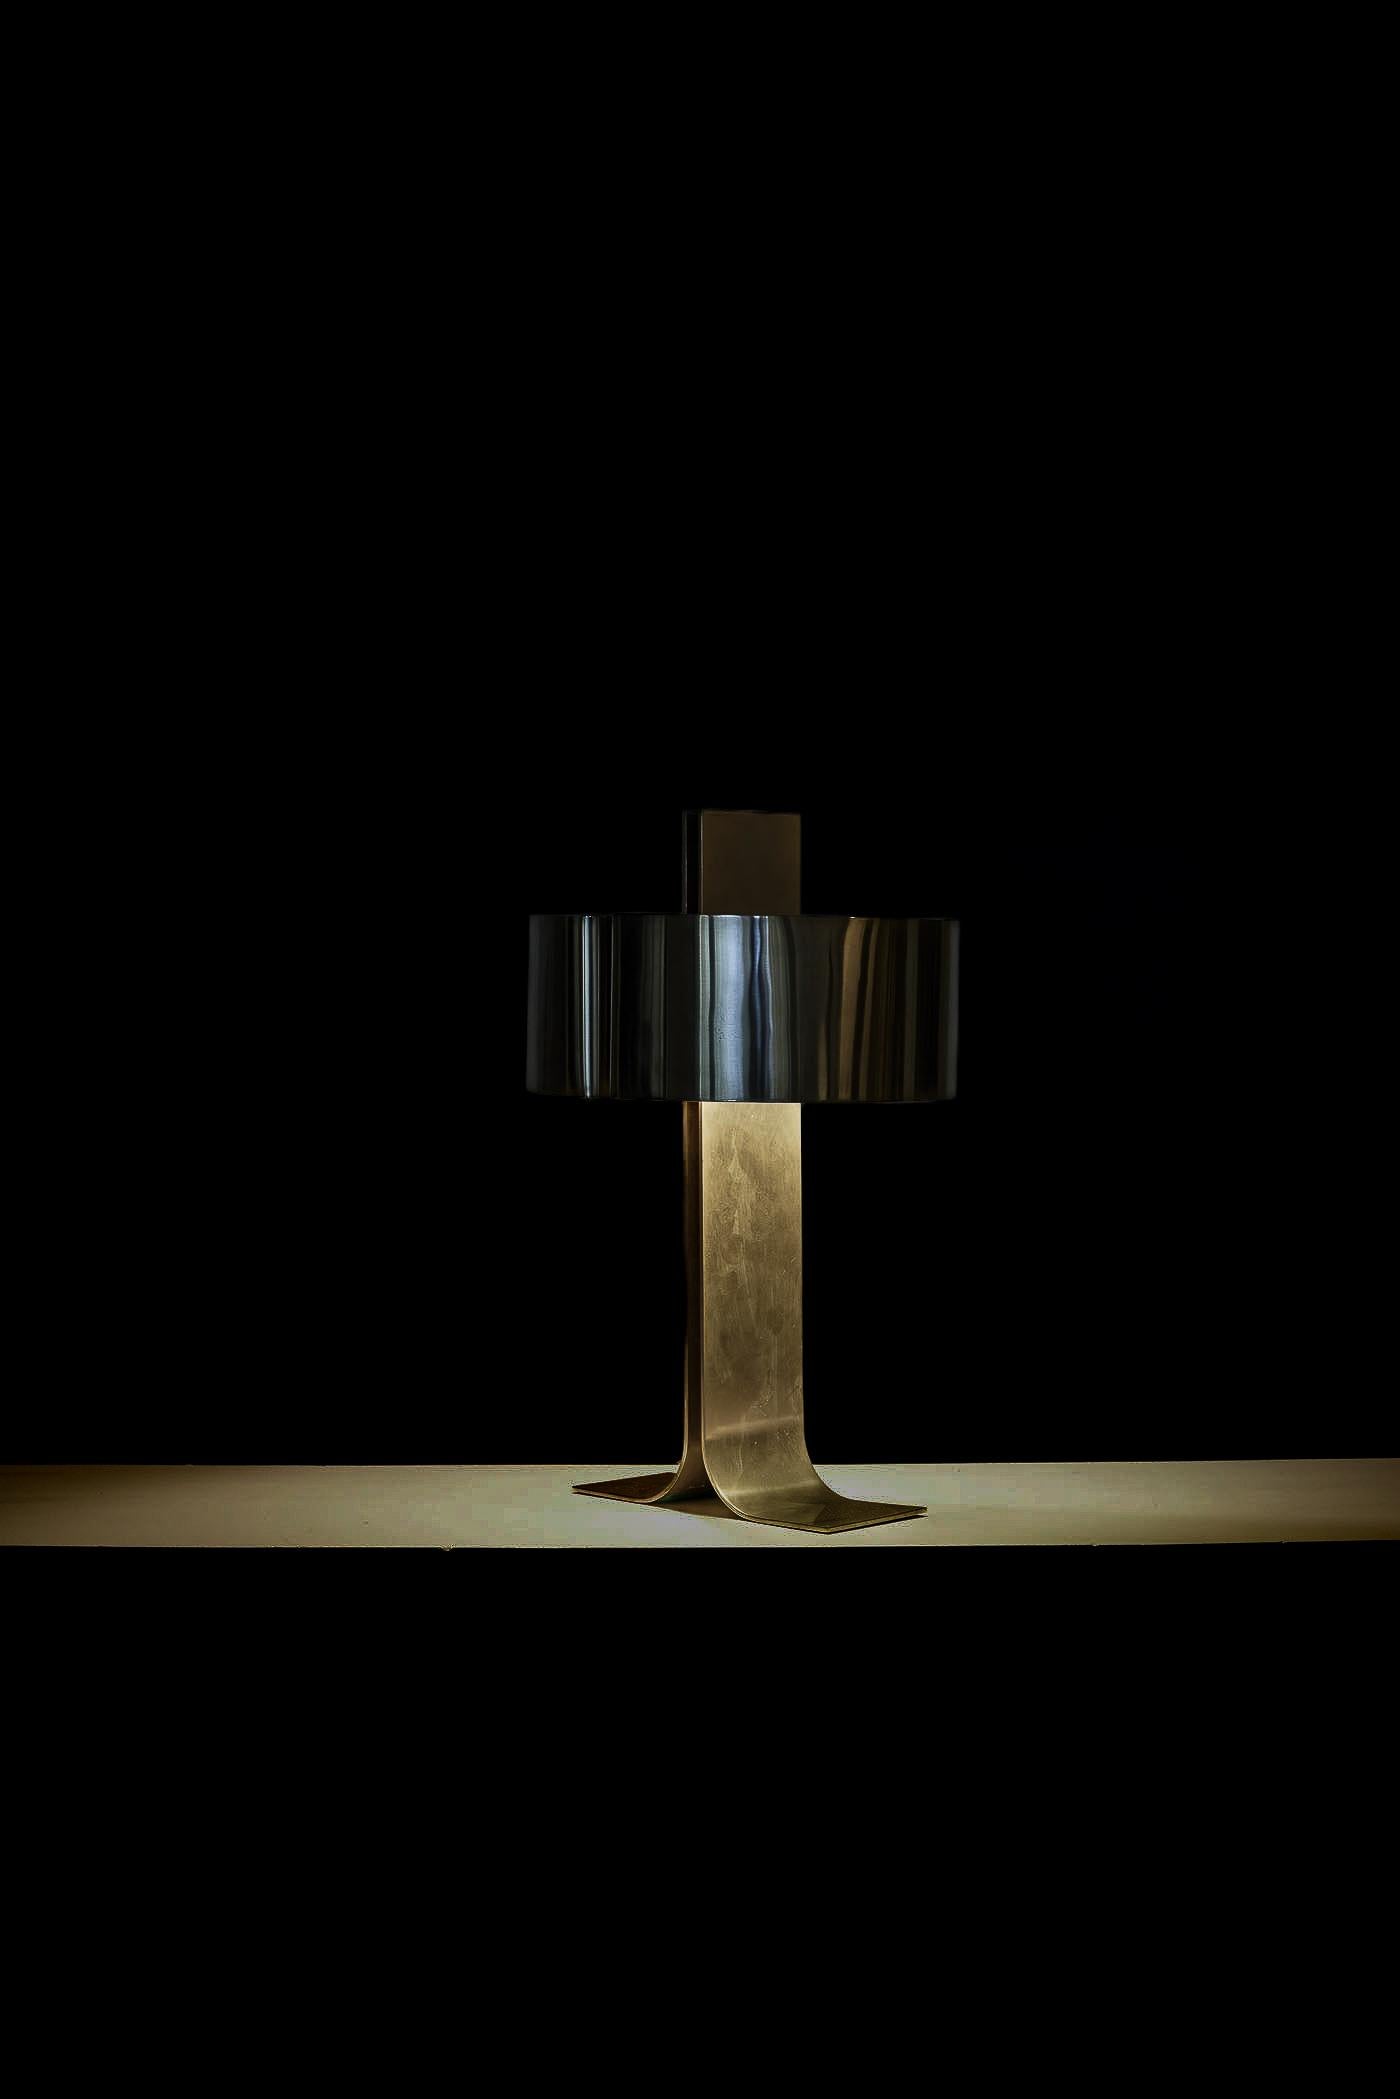 Table lamp model Pingoin by Sabine Charoy, 1970s. Brushed metal lamp produced by Verre Lumière. Minimal signs of wear. It is in working condition.
LP1197